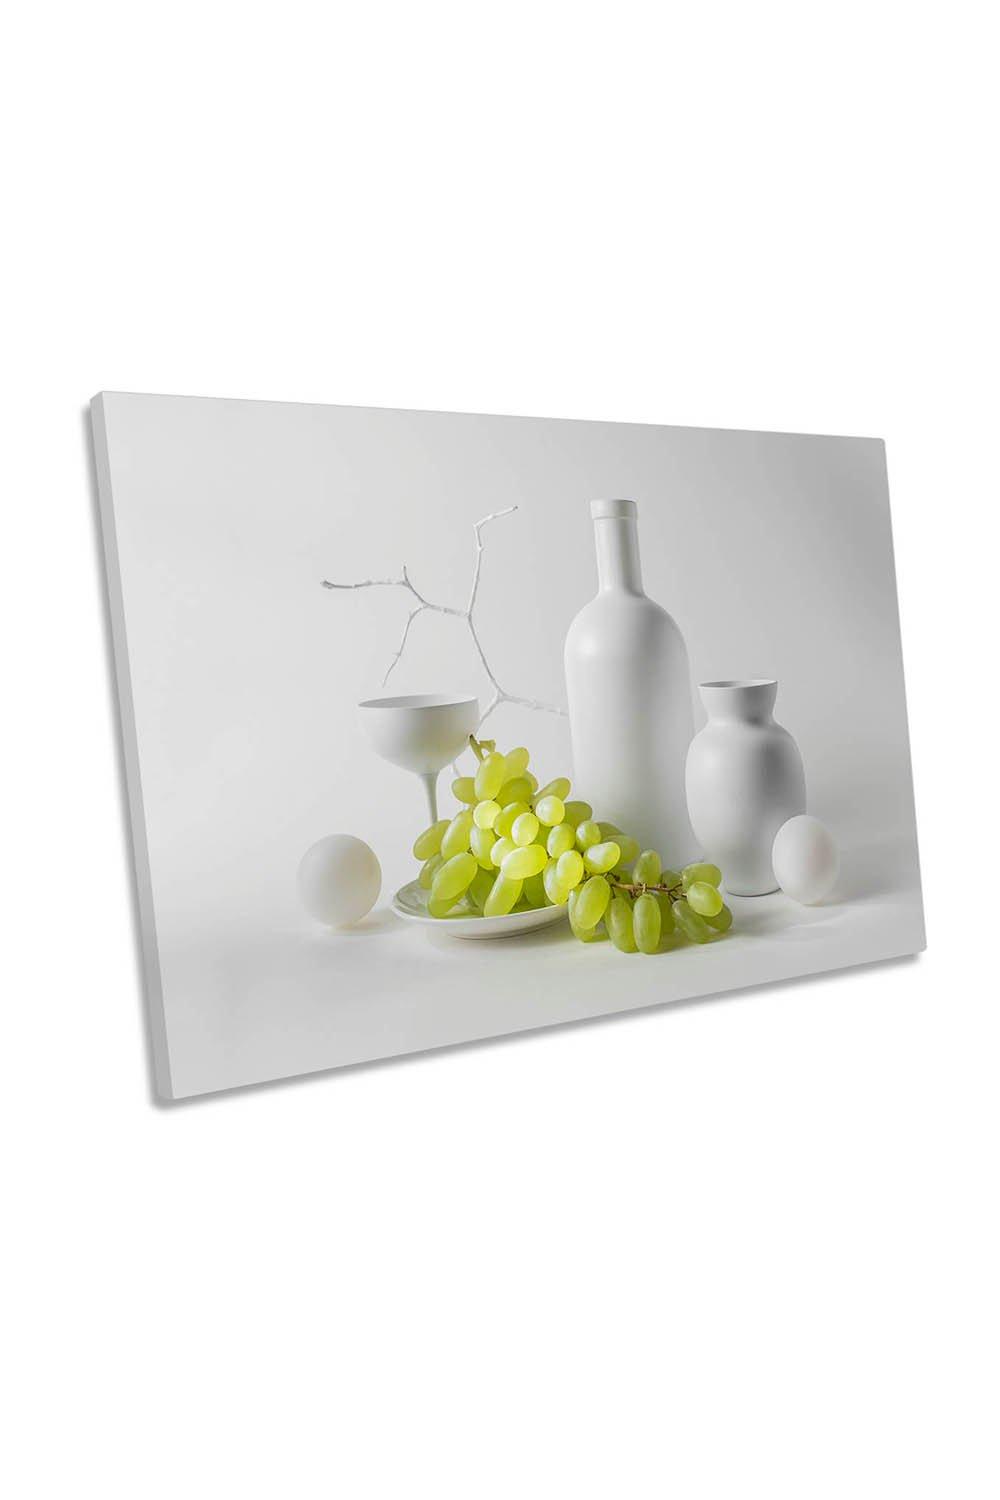 White Vase and Green Grapes Still Life Kitchen Canvas Wall Art Picture Print